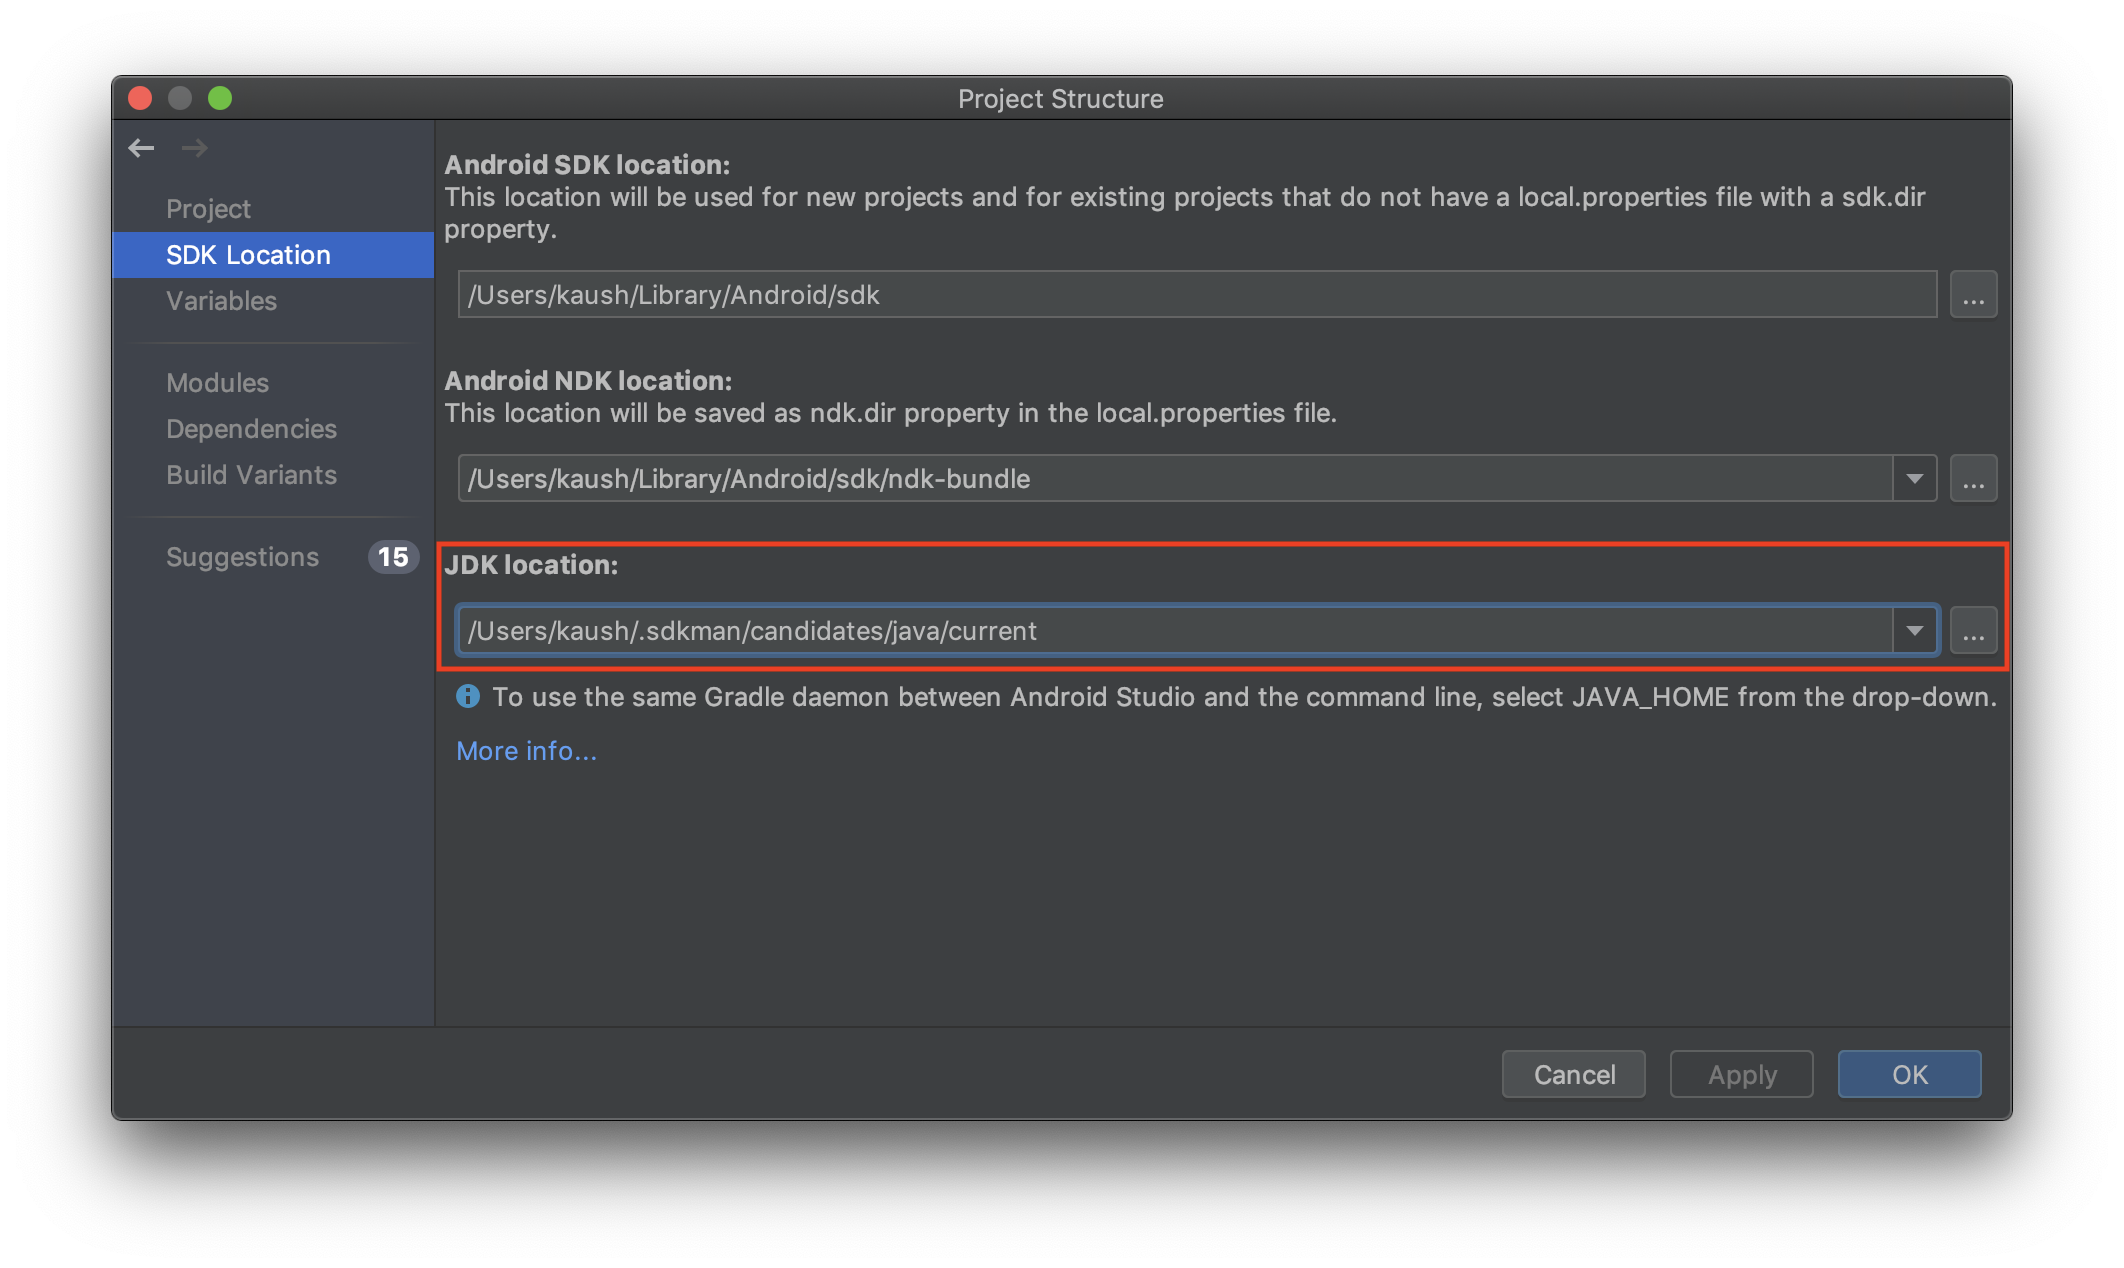 Android Studio Project Settings > SDK Location